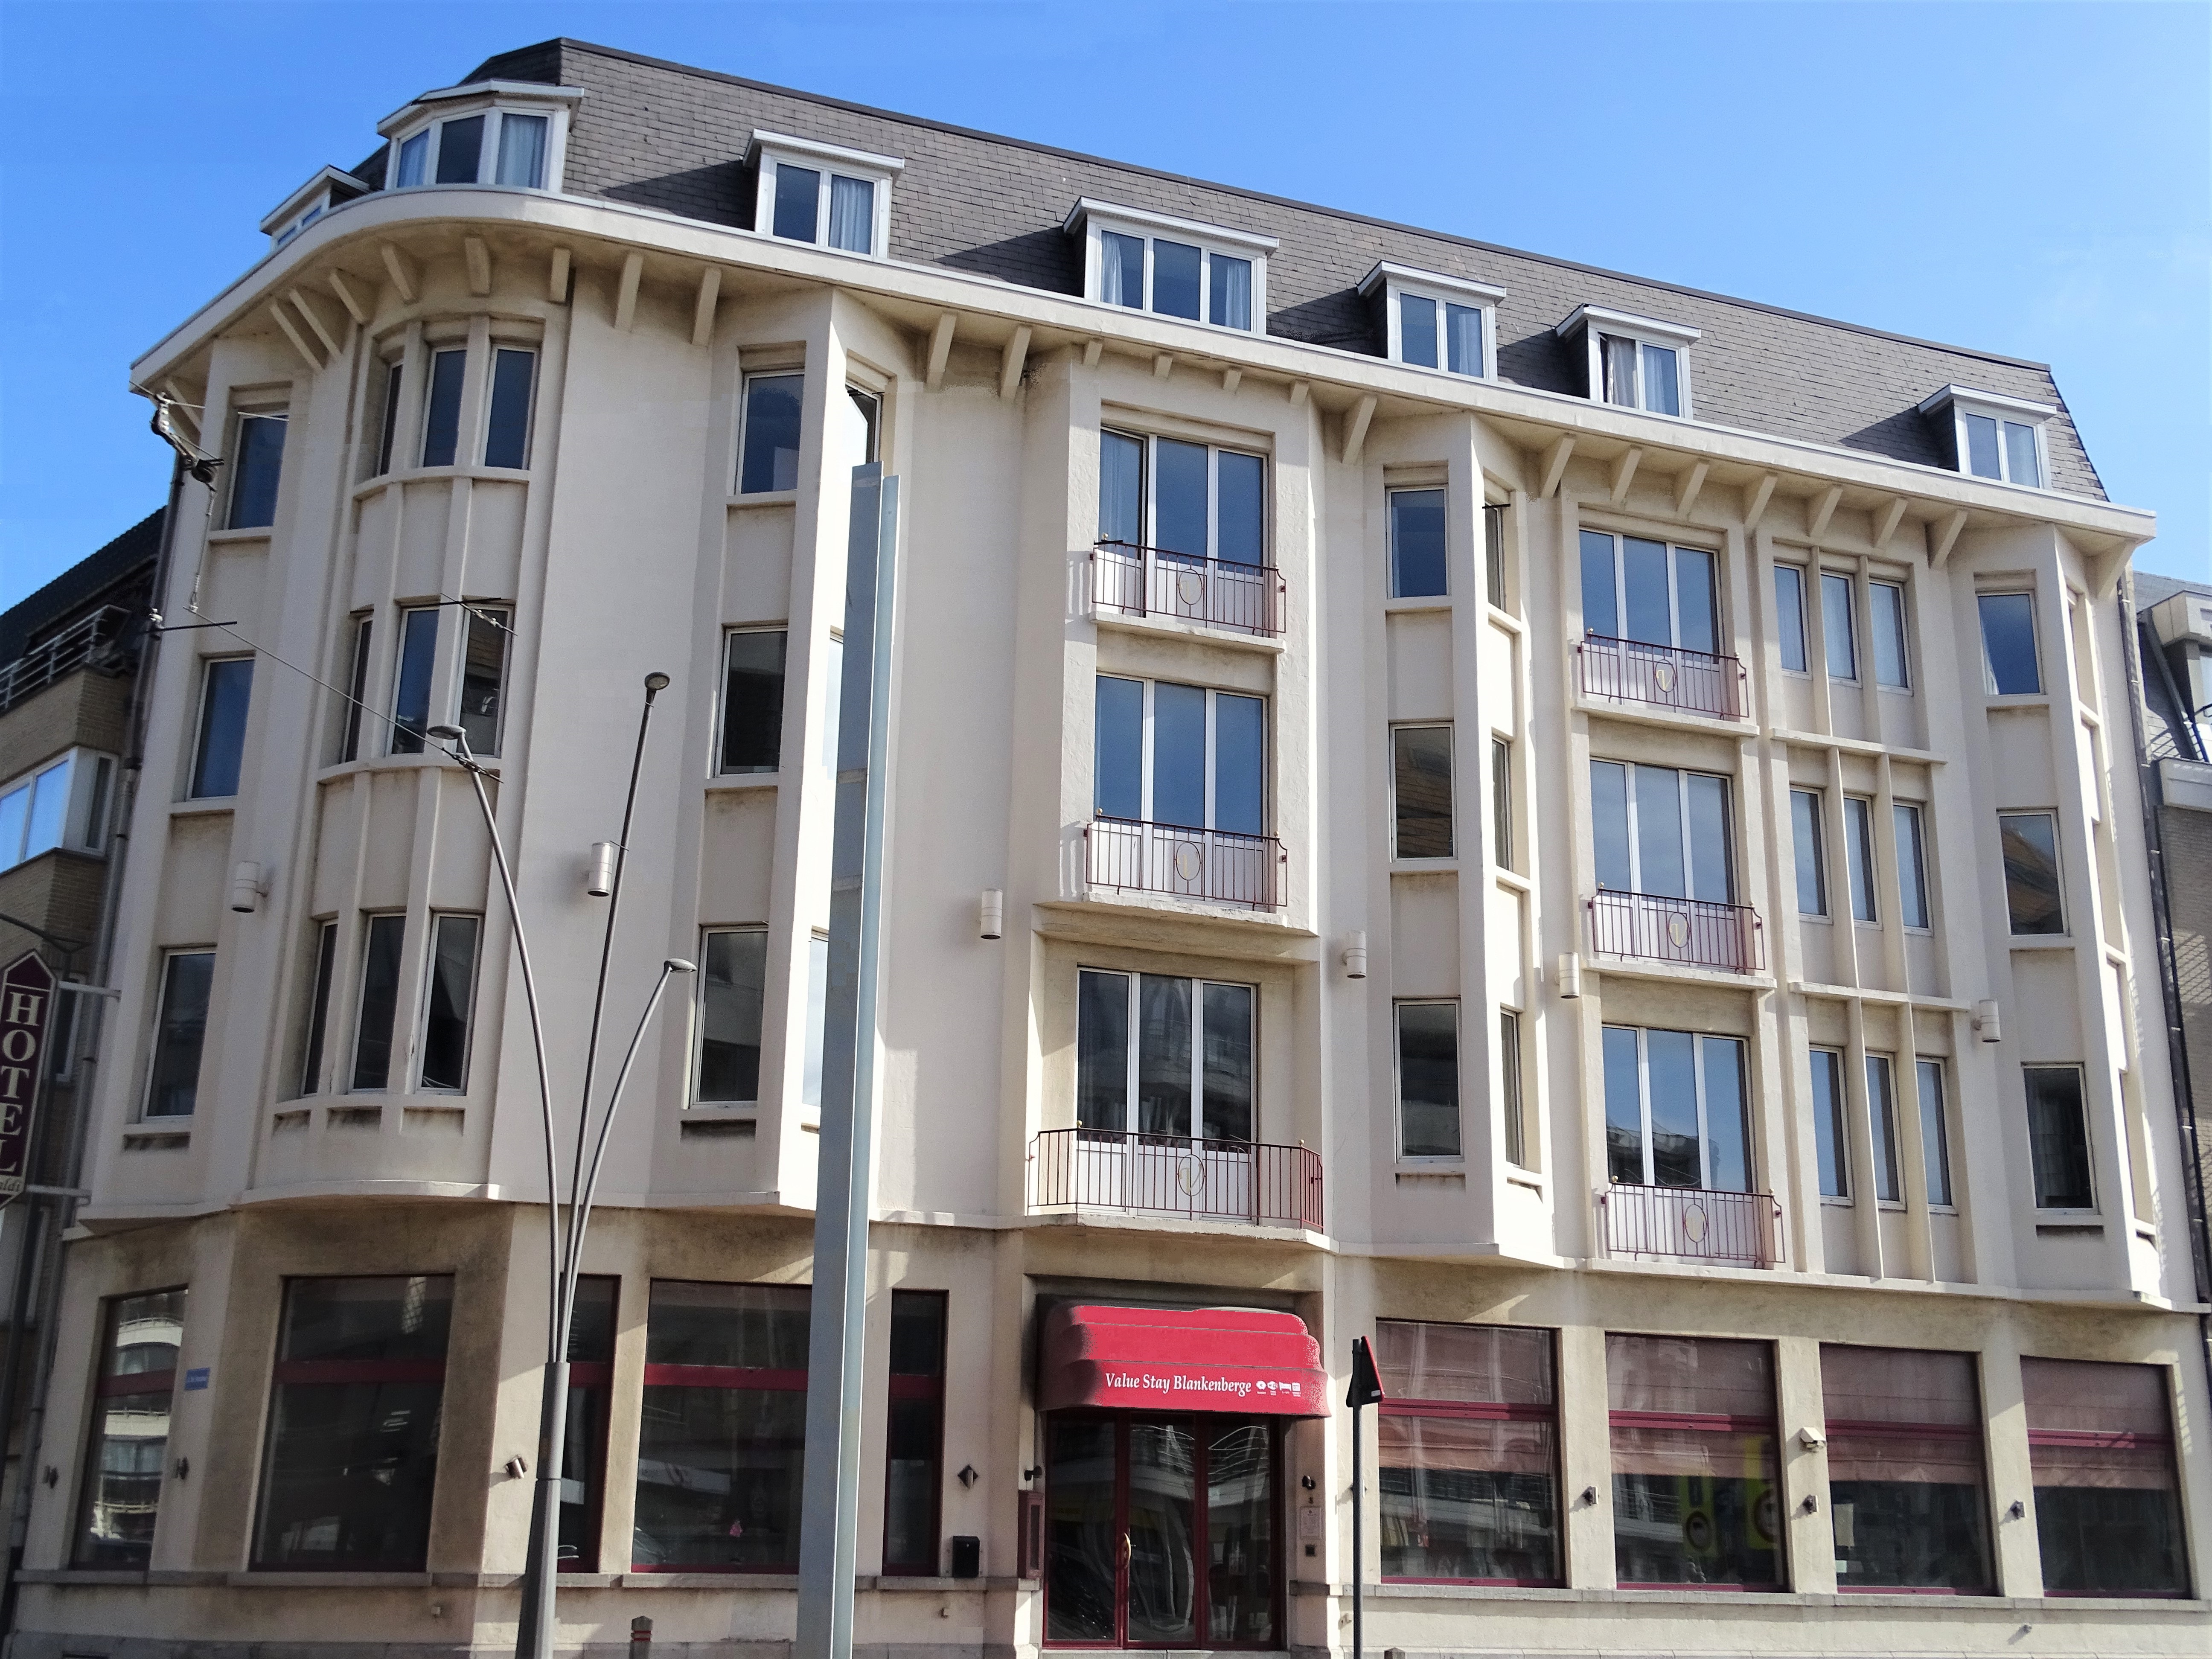 Value Stay Blankenberge <br/>56.00 ew <br/> <a href='http://vakantieoplossing.nl/outpage/?id=3c44b6150cc693870078ea60a2c91098' target='_blank'>View Details</a>